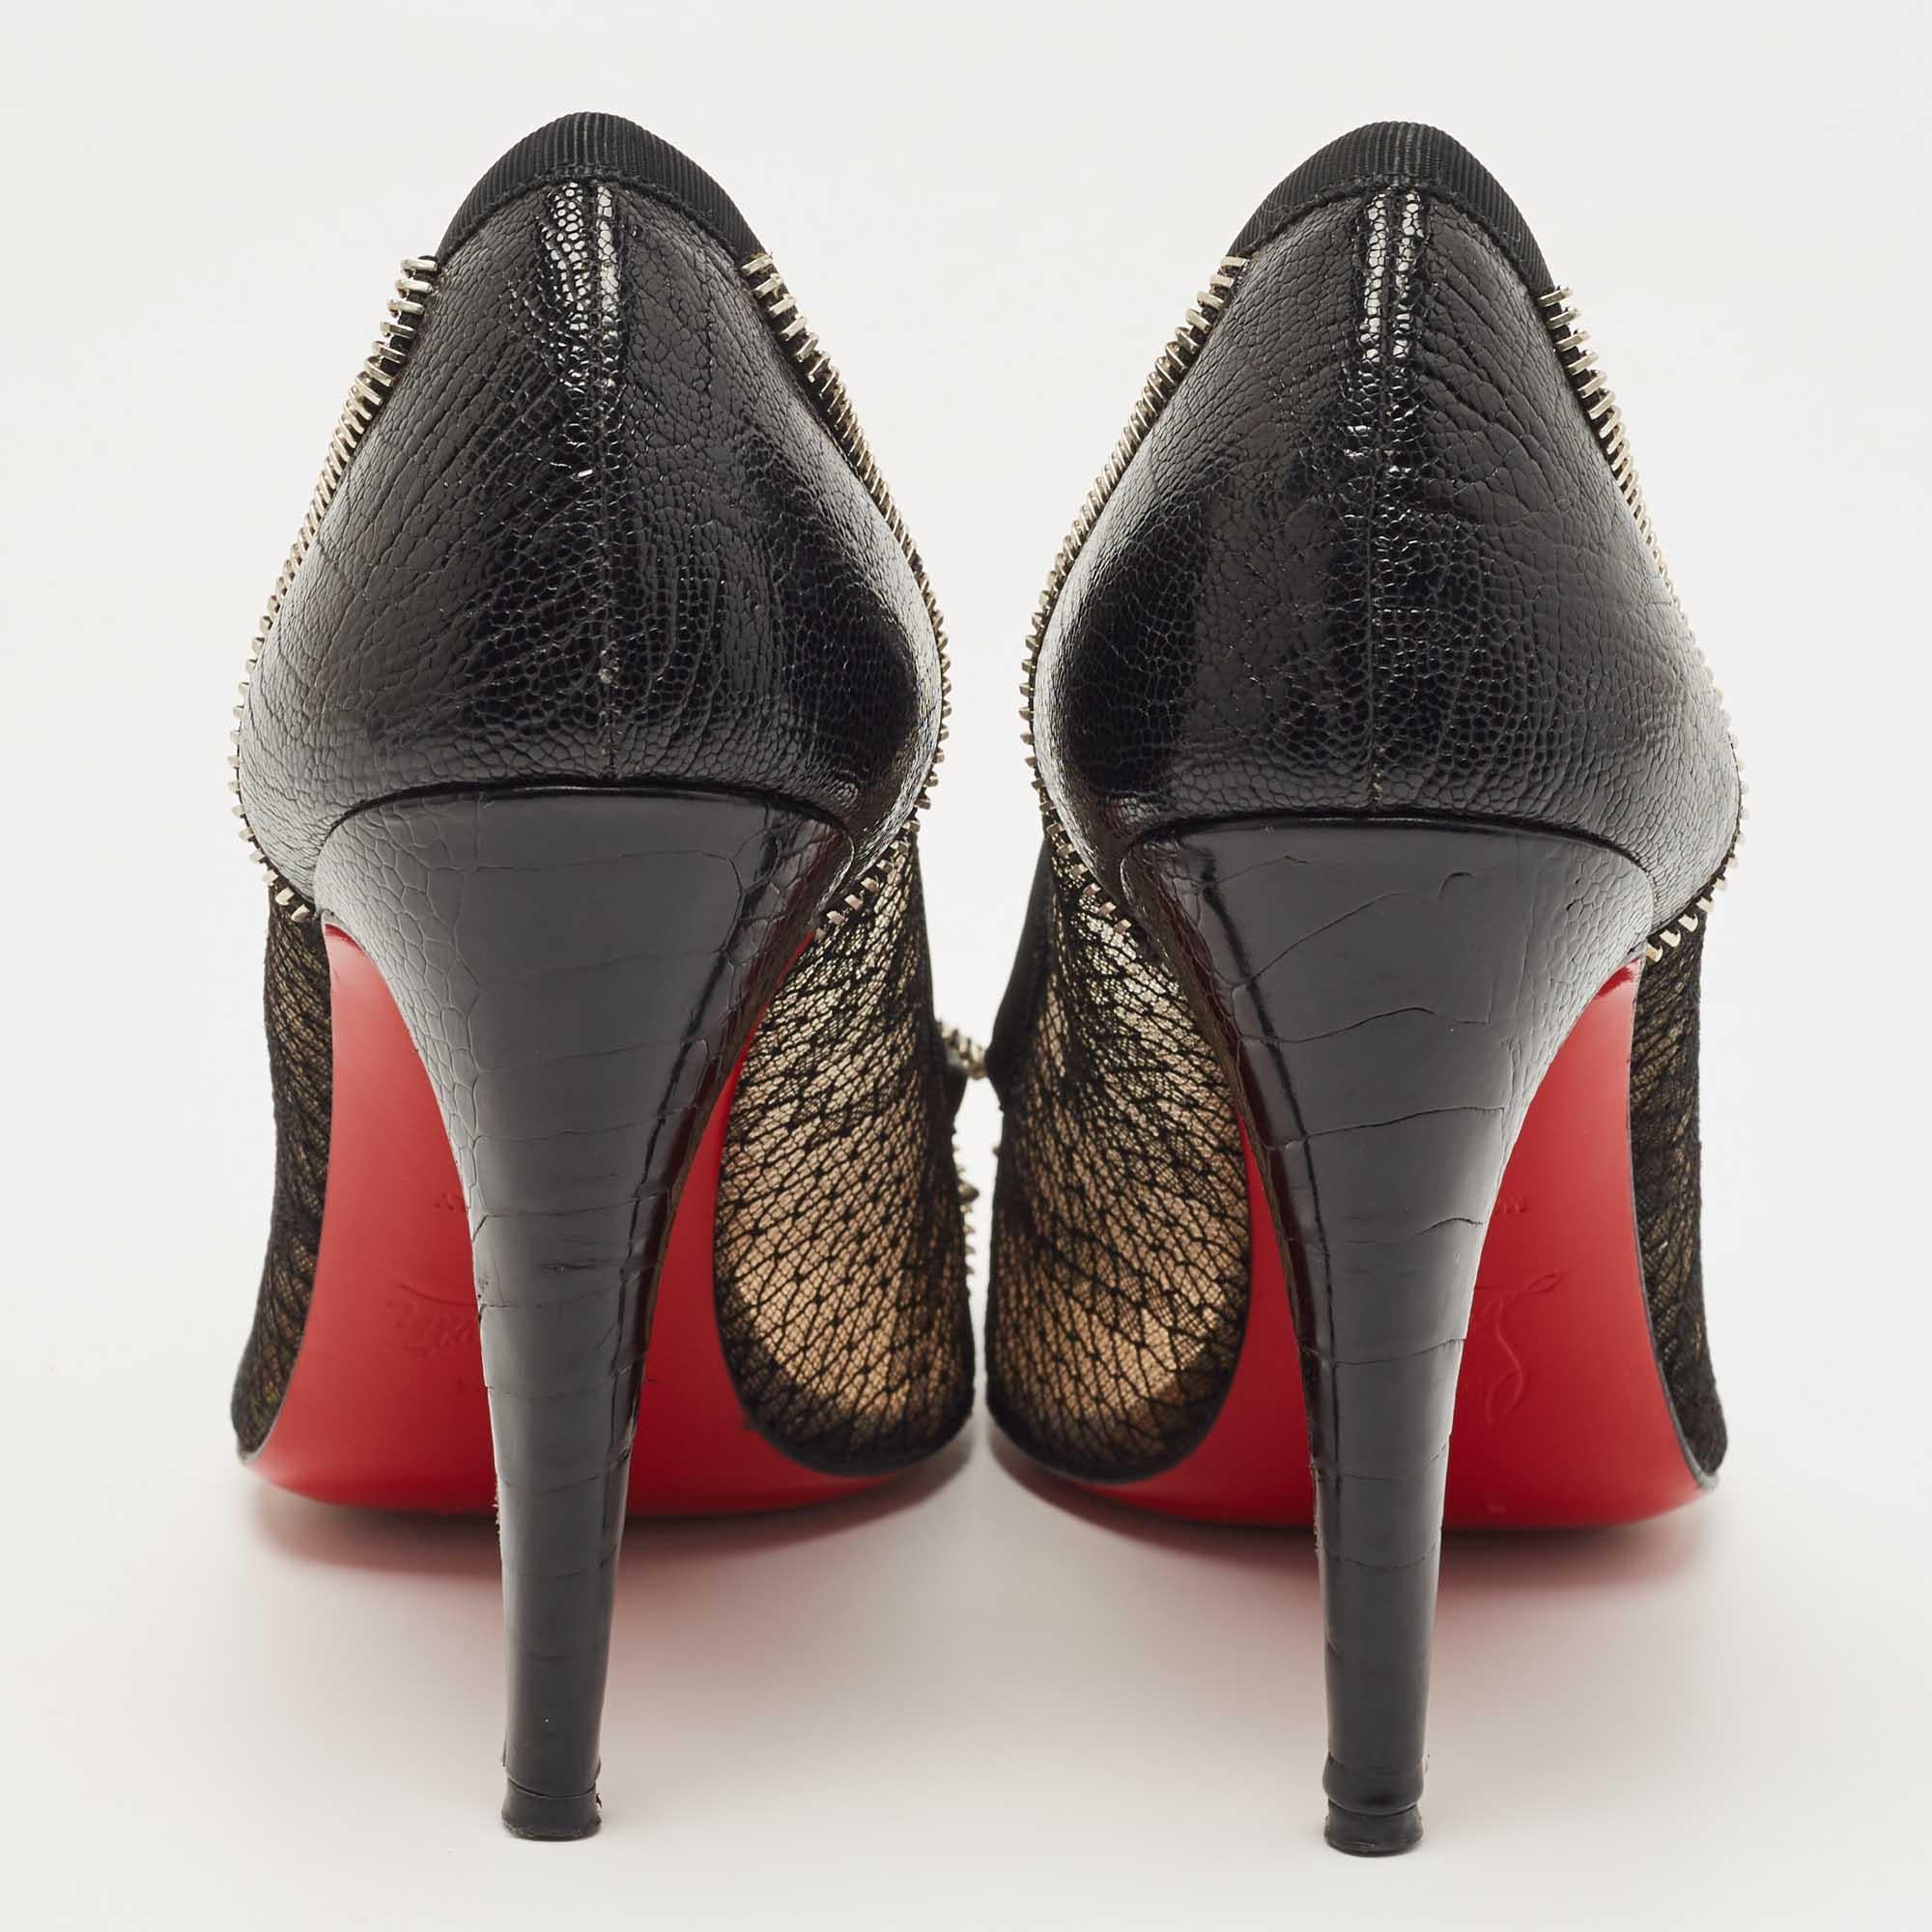 Christian Louboutin Black Leather and Lace Candy Spiked Pumps Size 38 In Good Condition For Sale In Dubai, Al Qouz 2